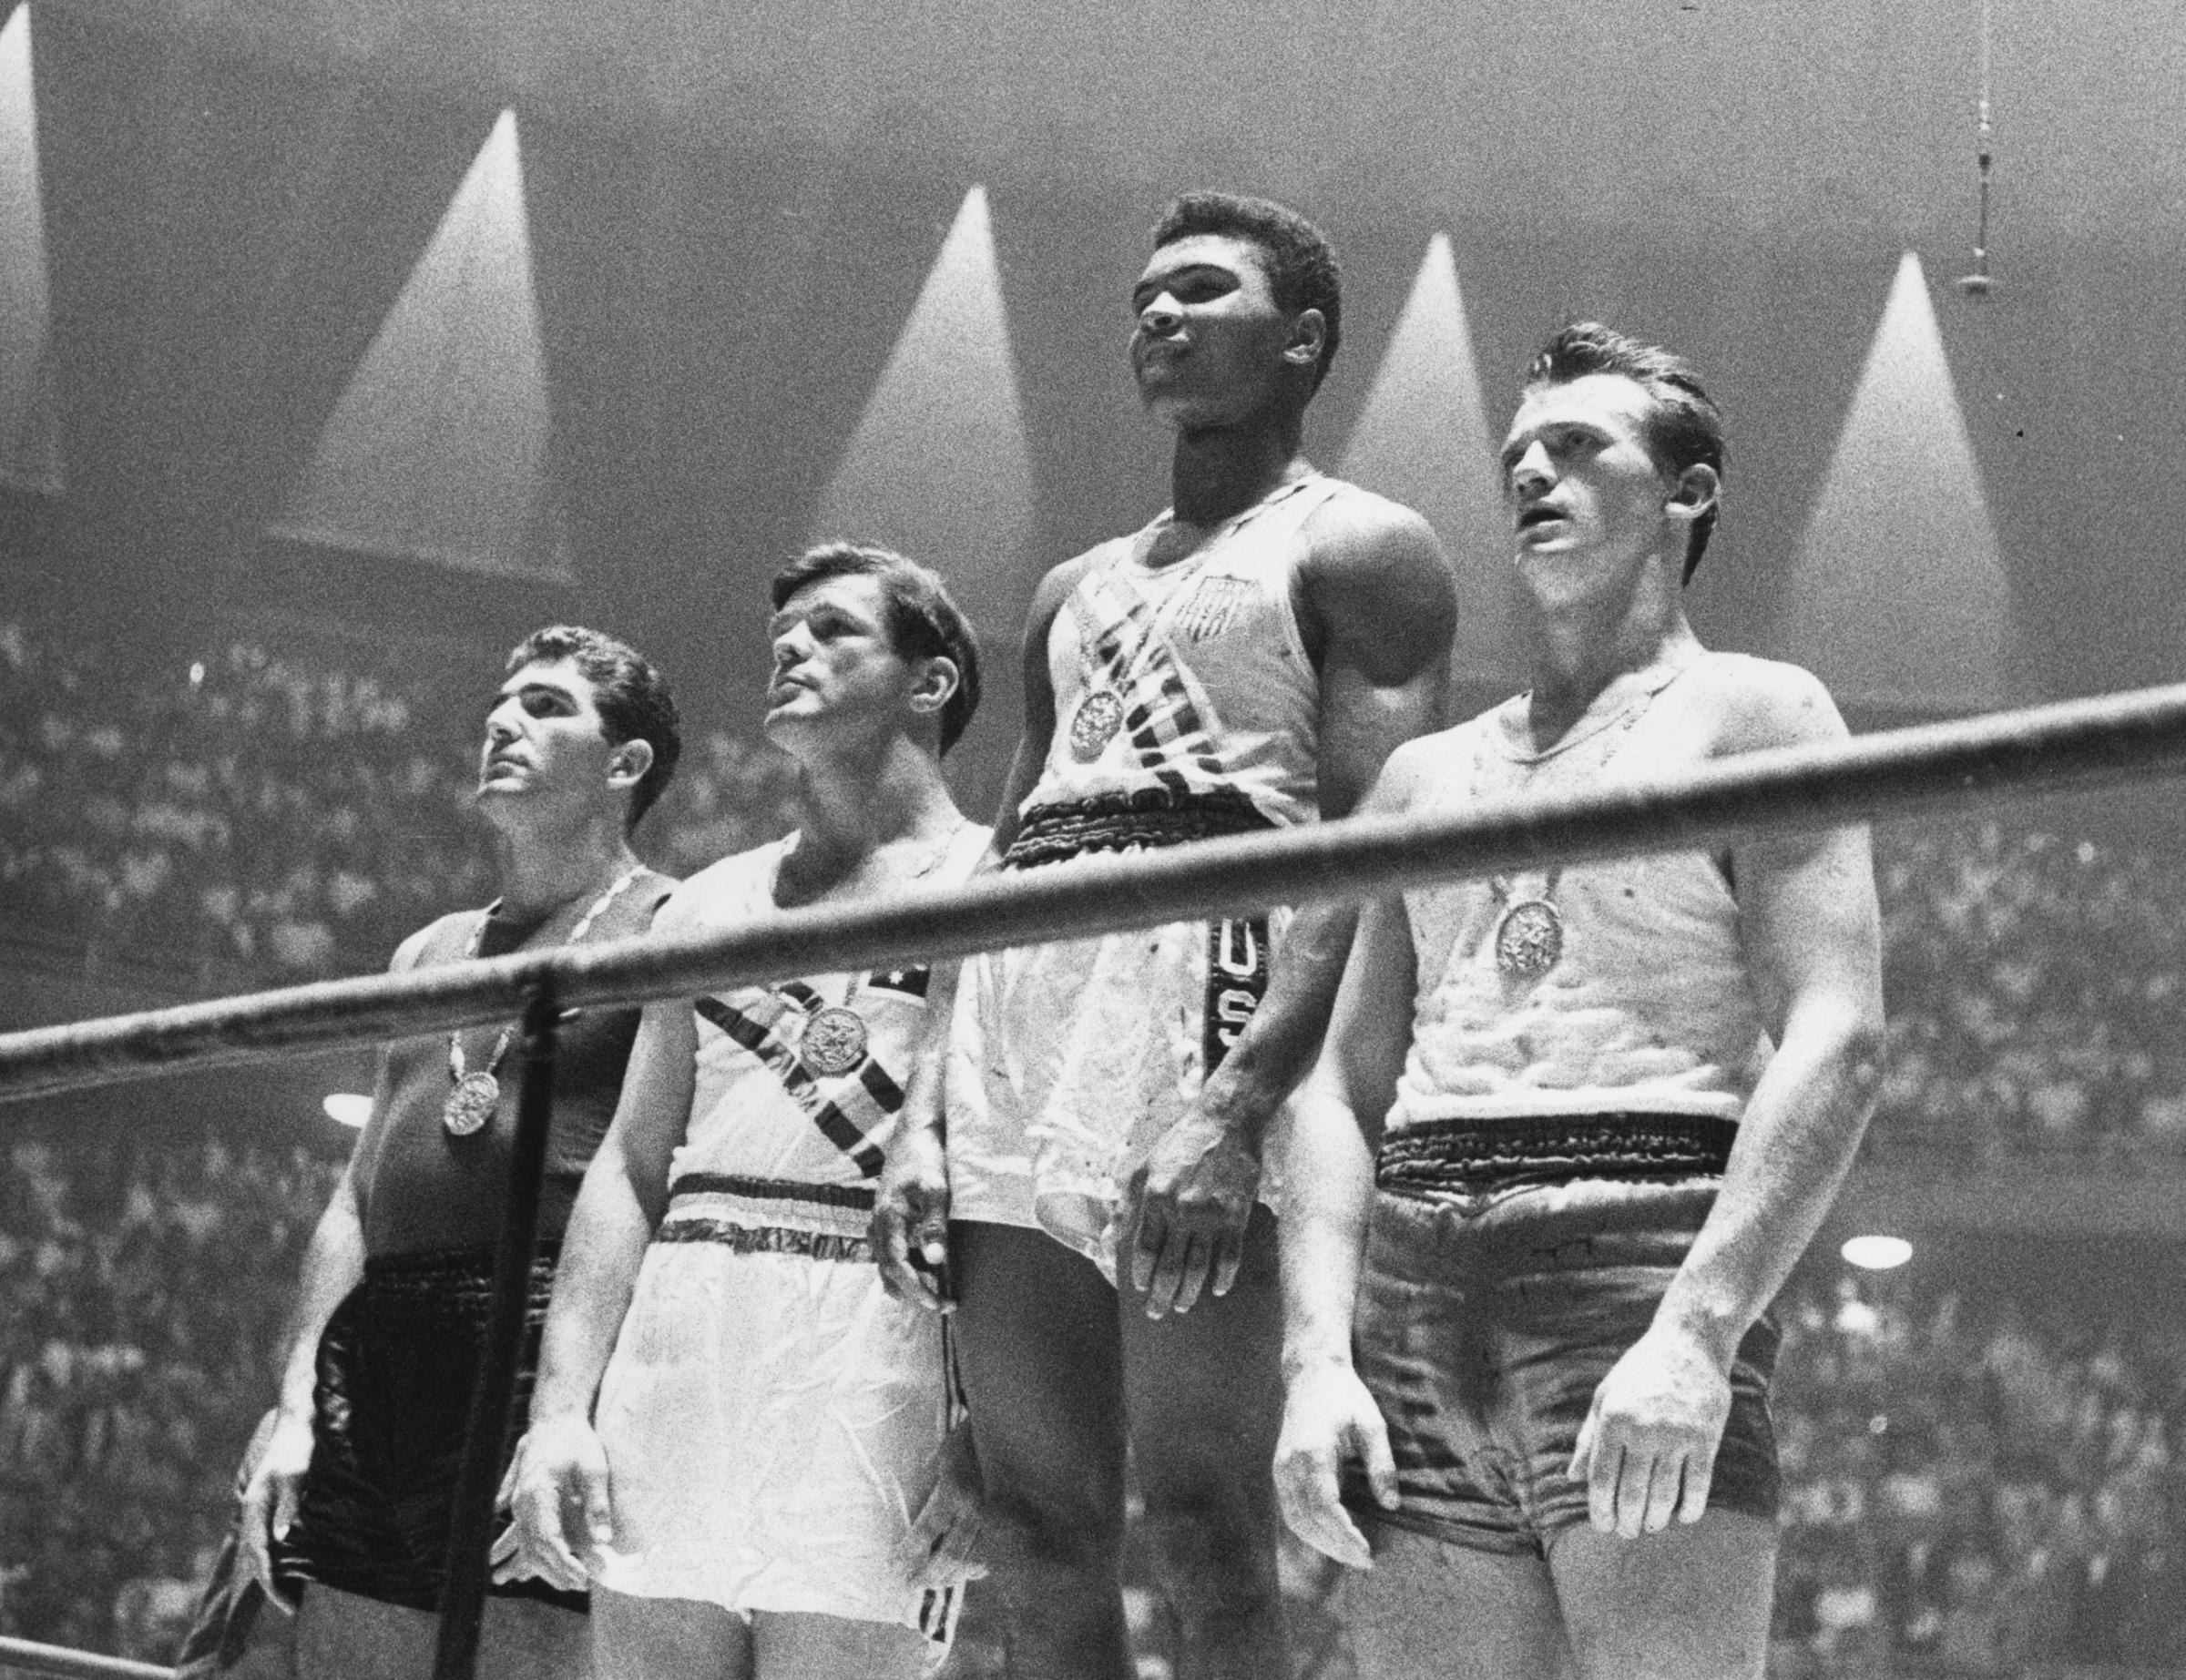 Cassius Clay Muhammad Ali Olympic medal winners 1960